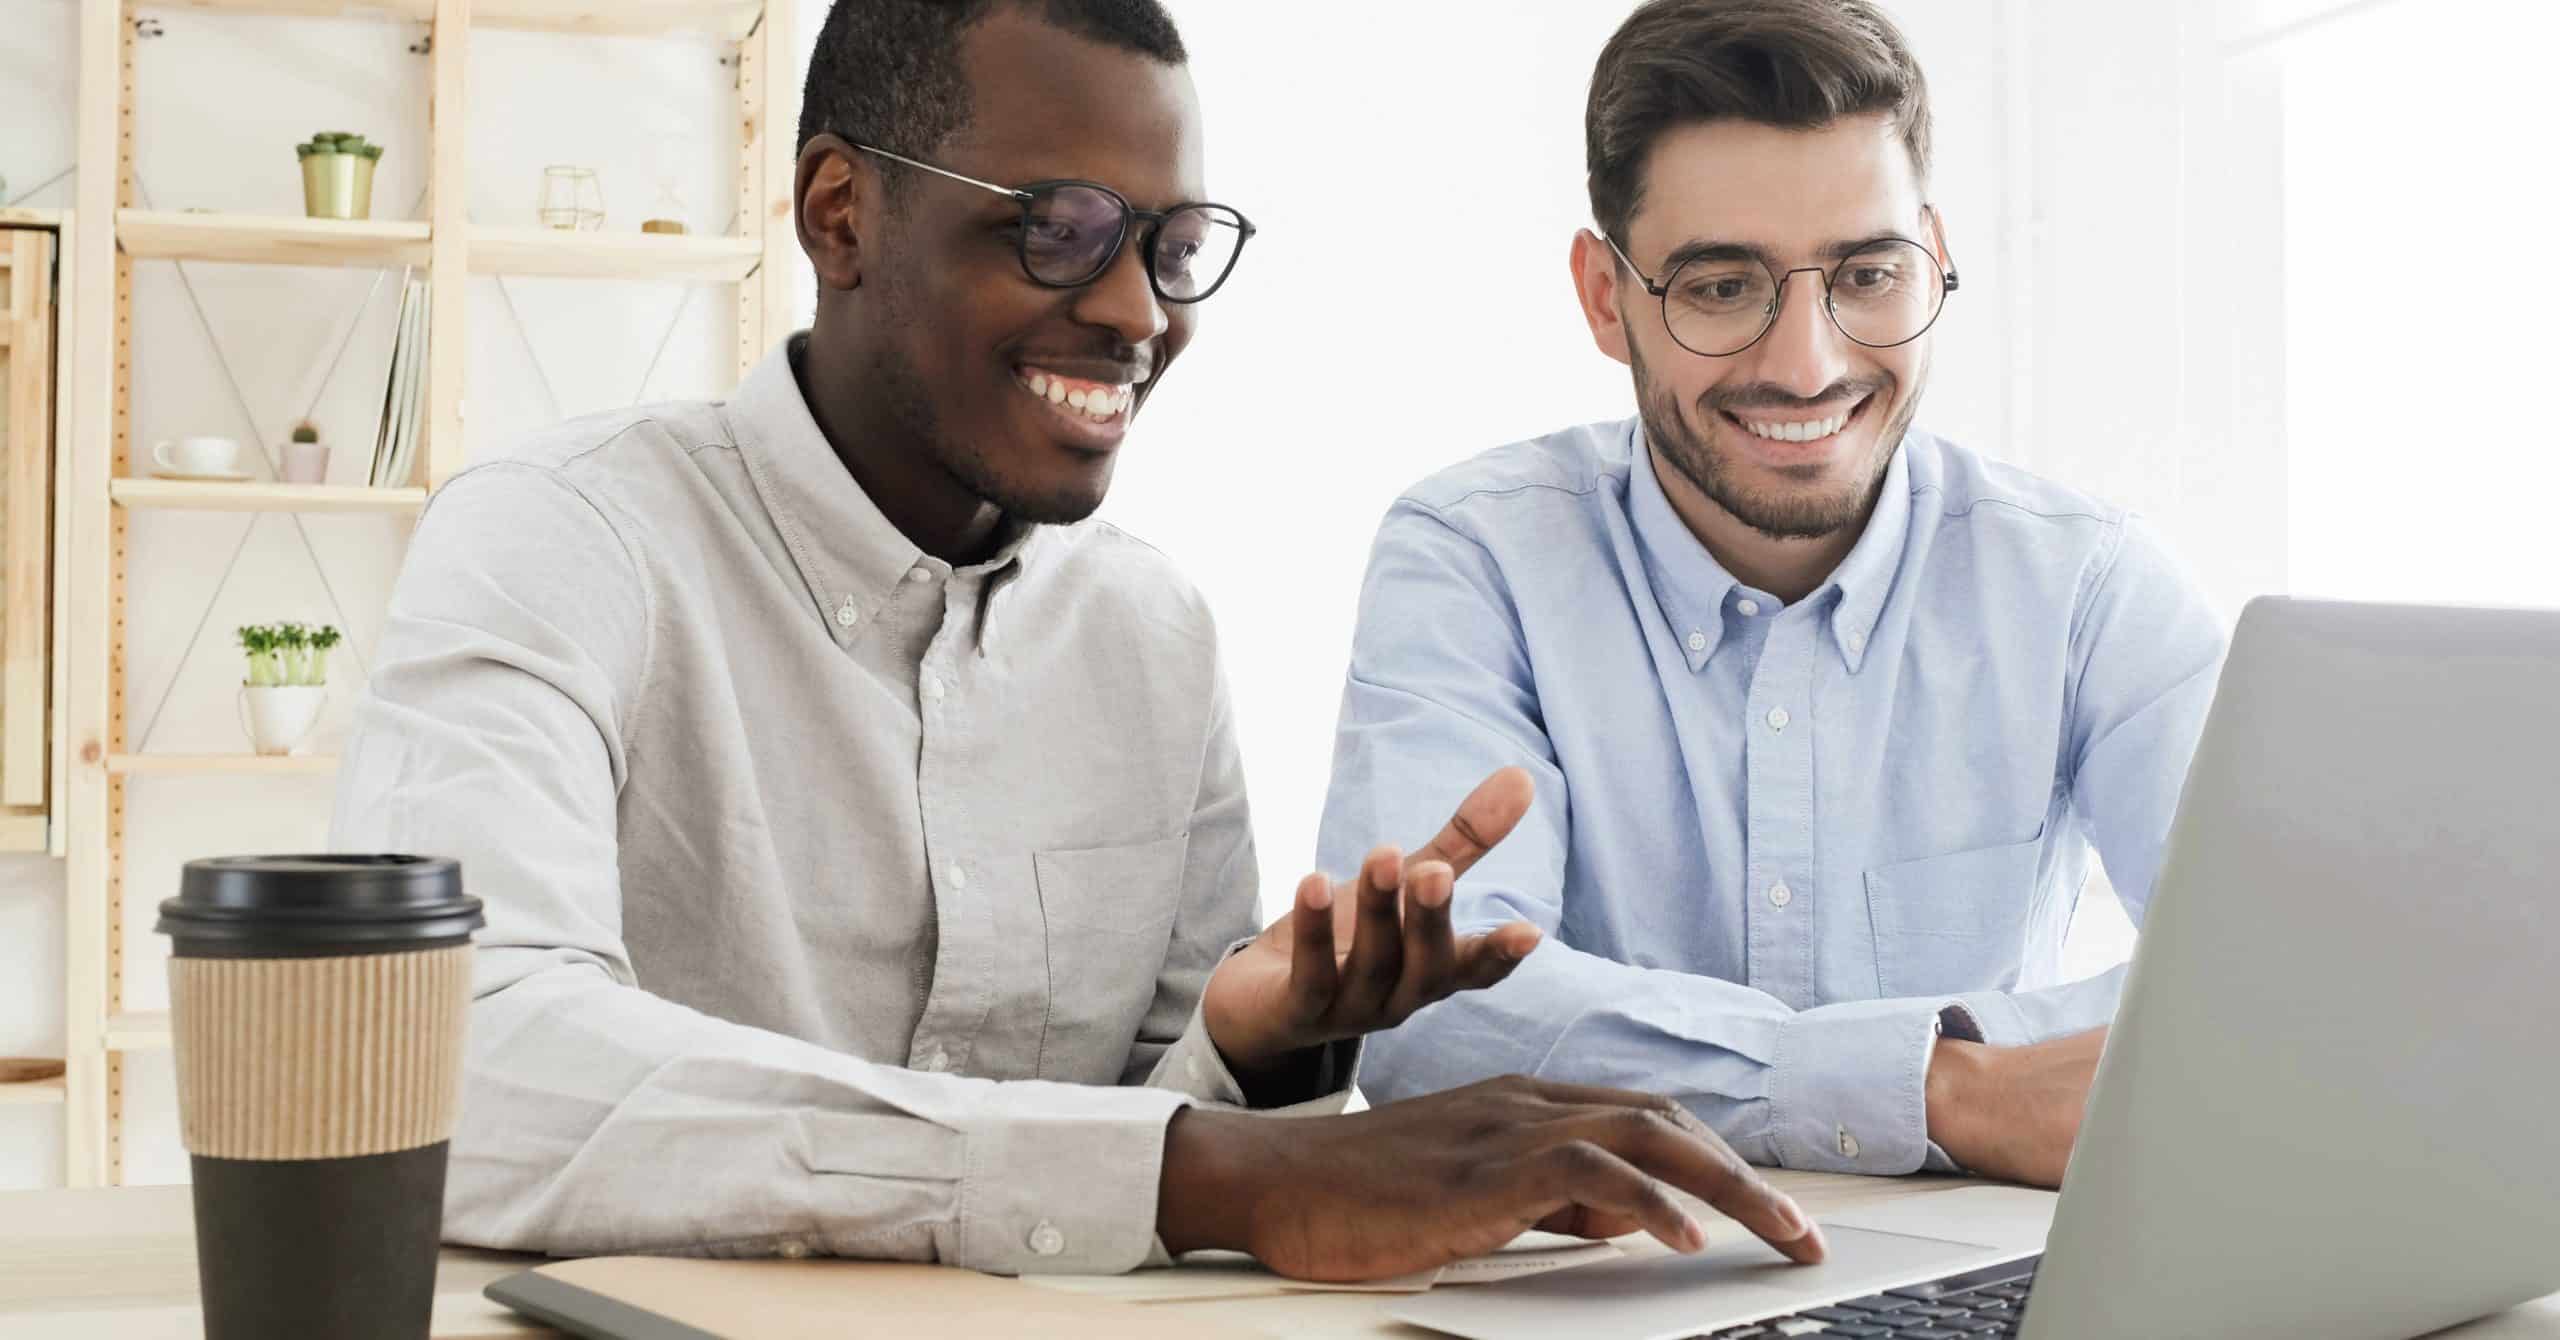 Two men dressed professionally and smiling gesture into a computer screen